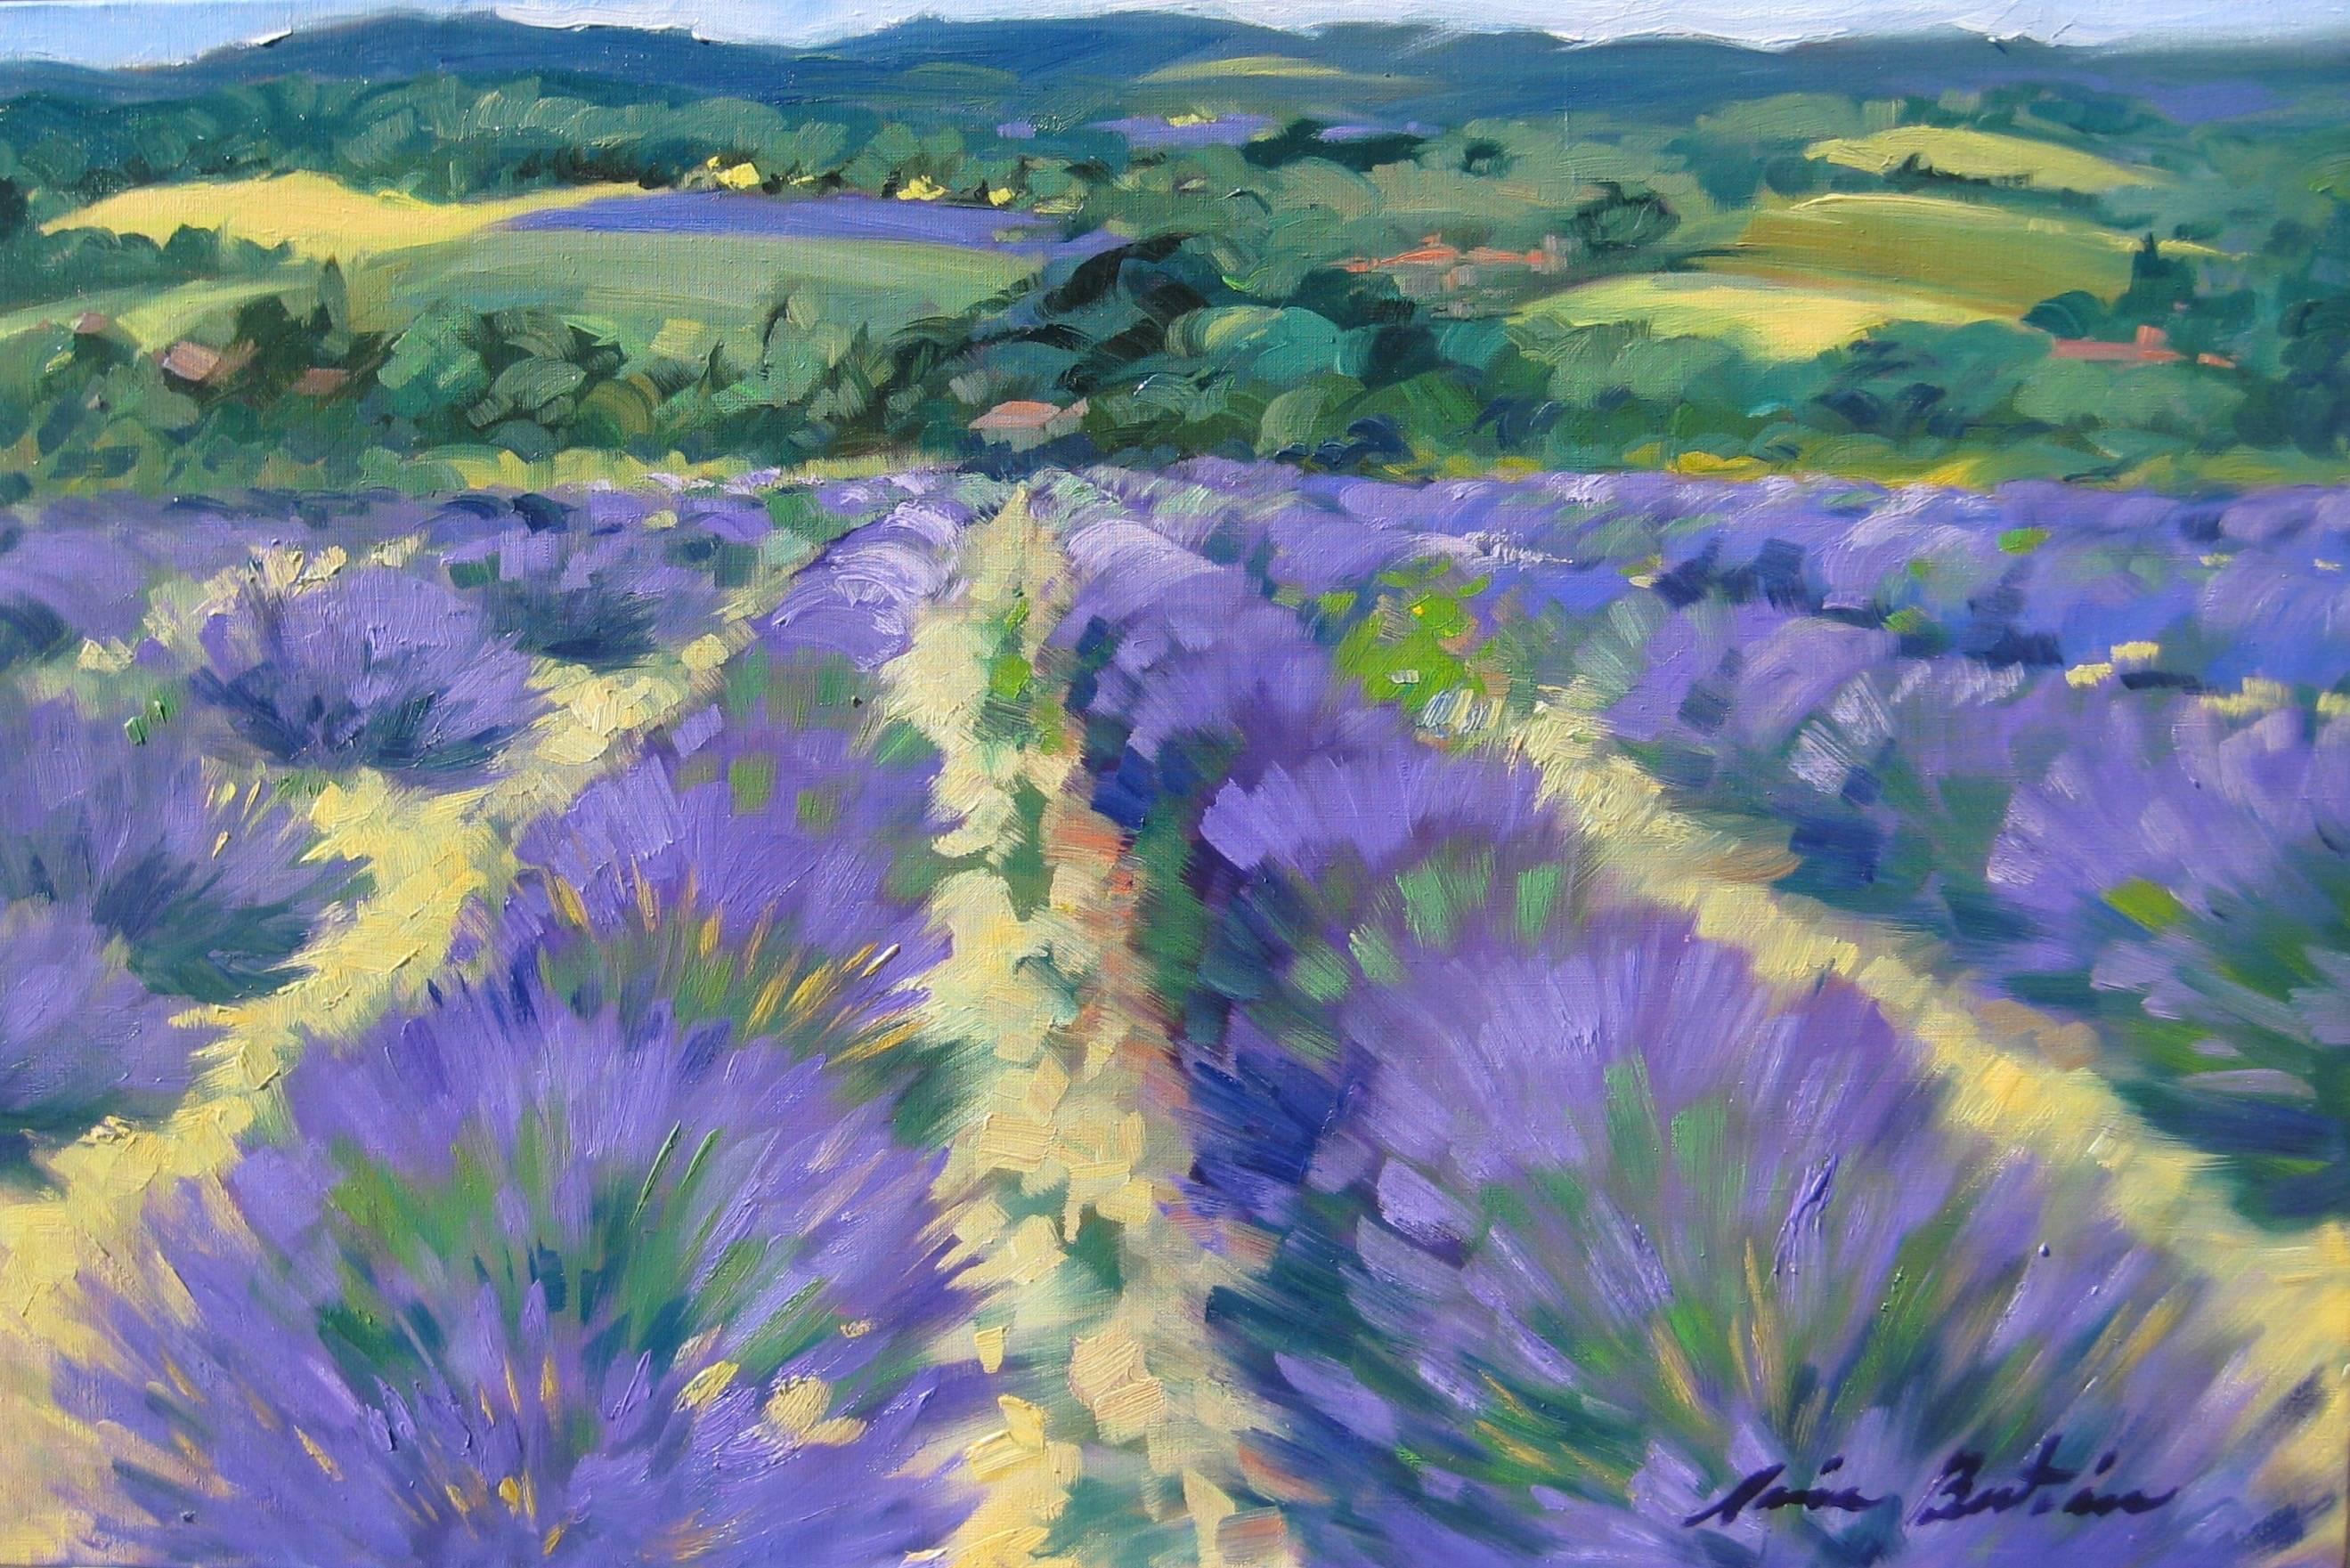 Maria Bertan Landscape Painting - "Through The Valley" Impressionist Oil Painting Of Lavender Fields in Provence